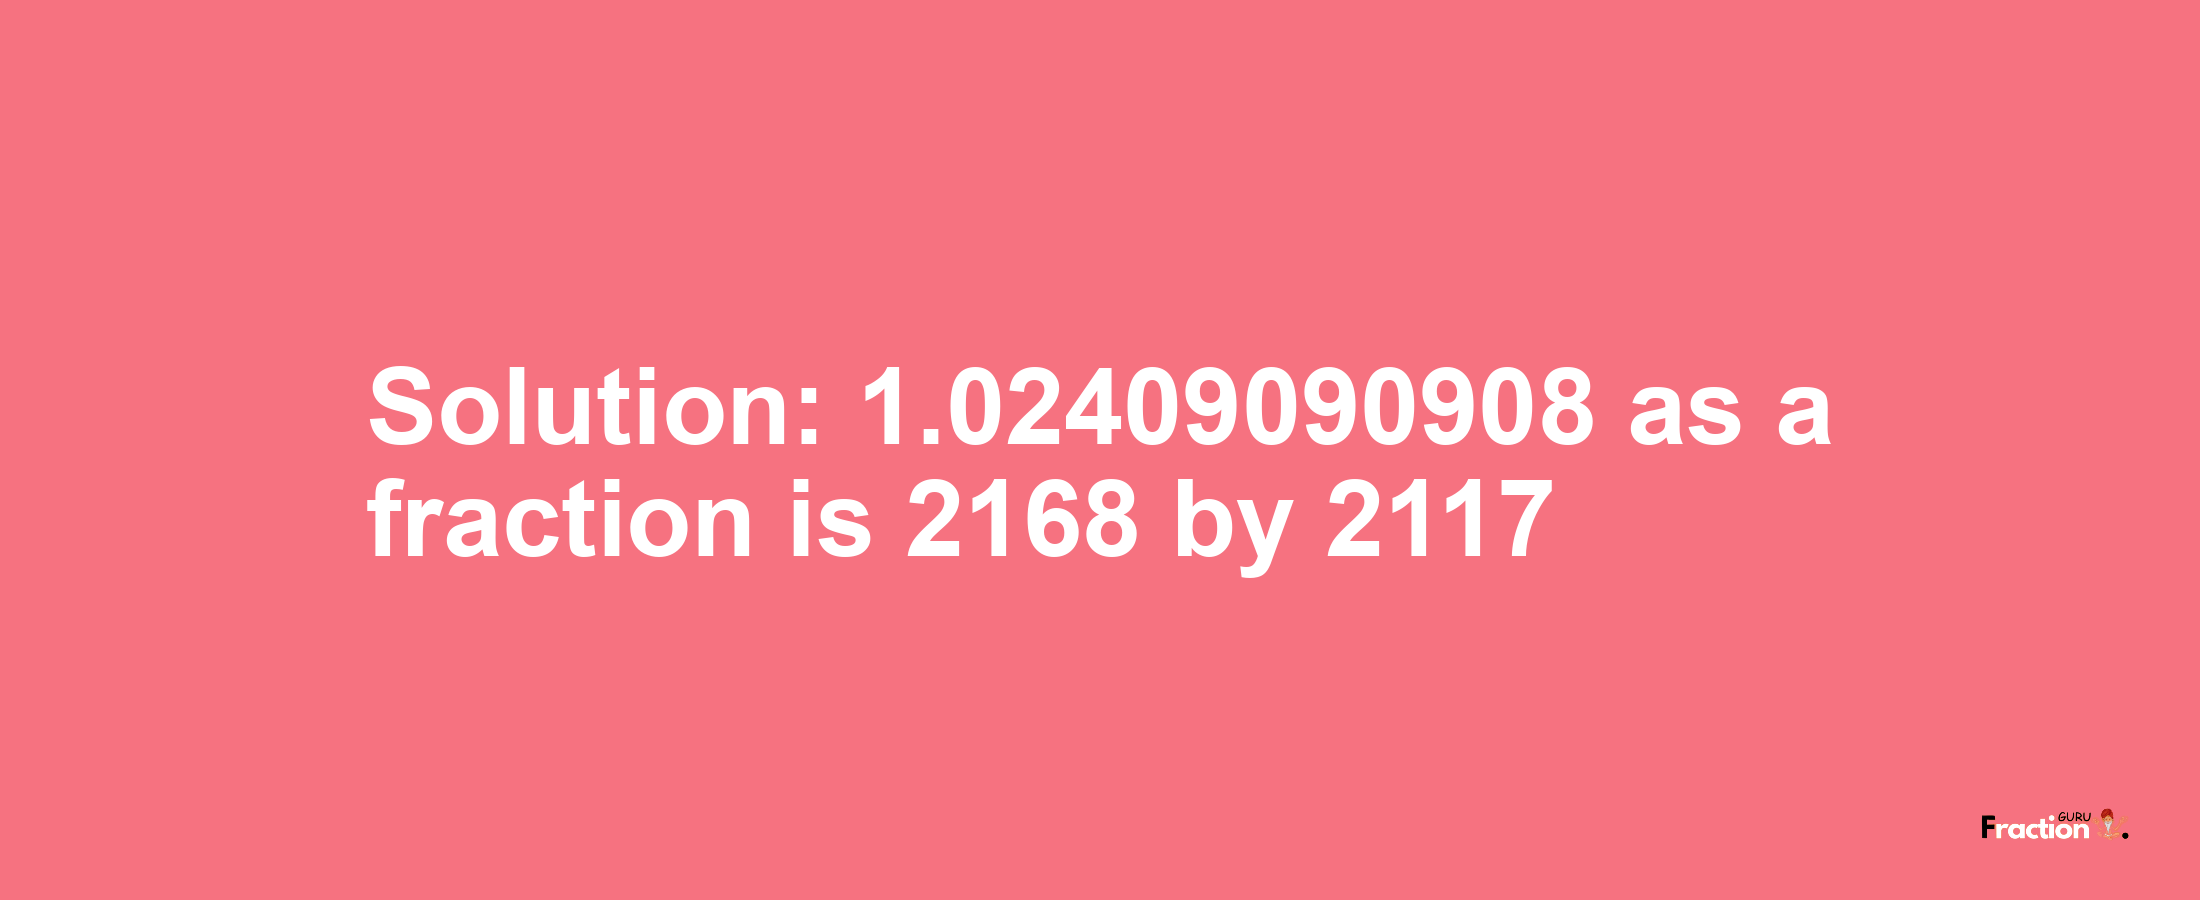 Solution:1.02409090908 as a fraction is 2168/2117